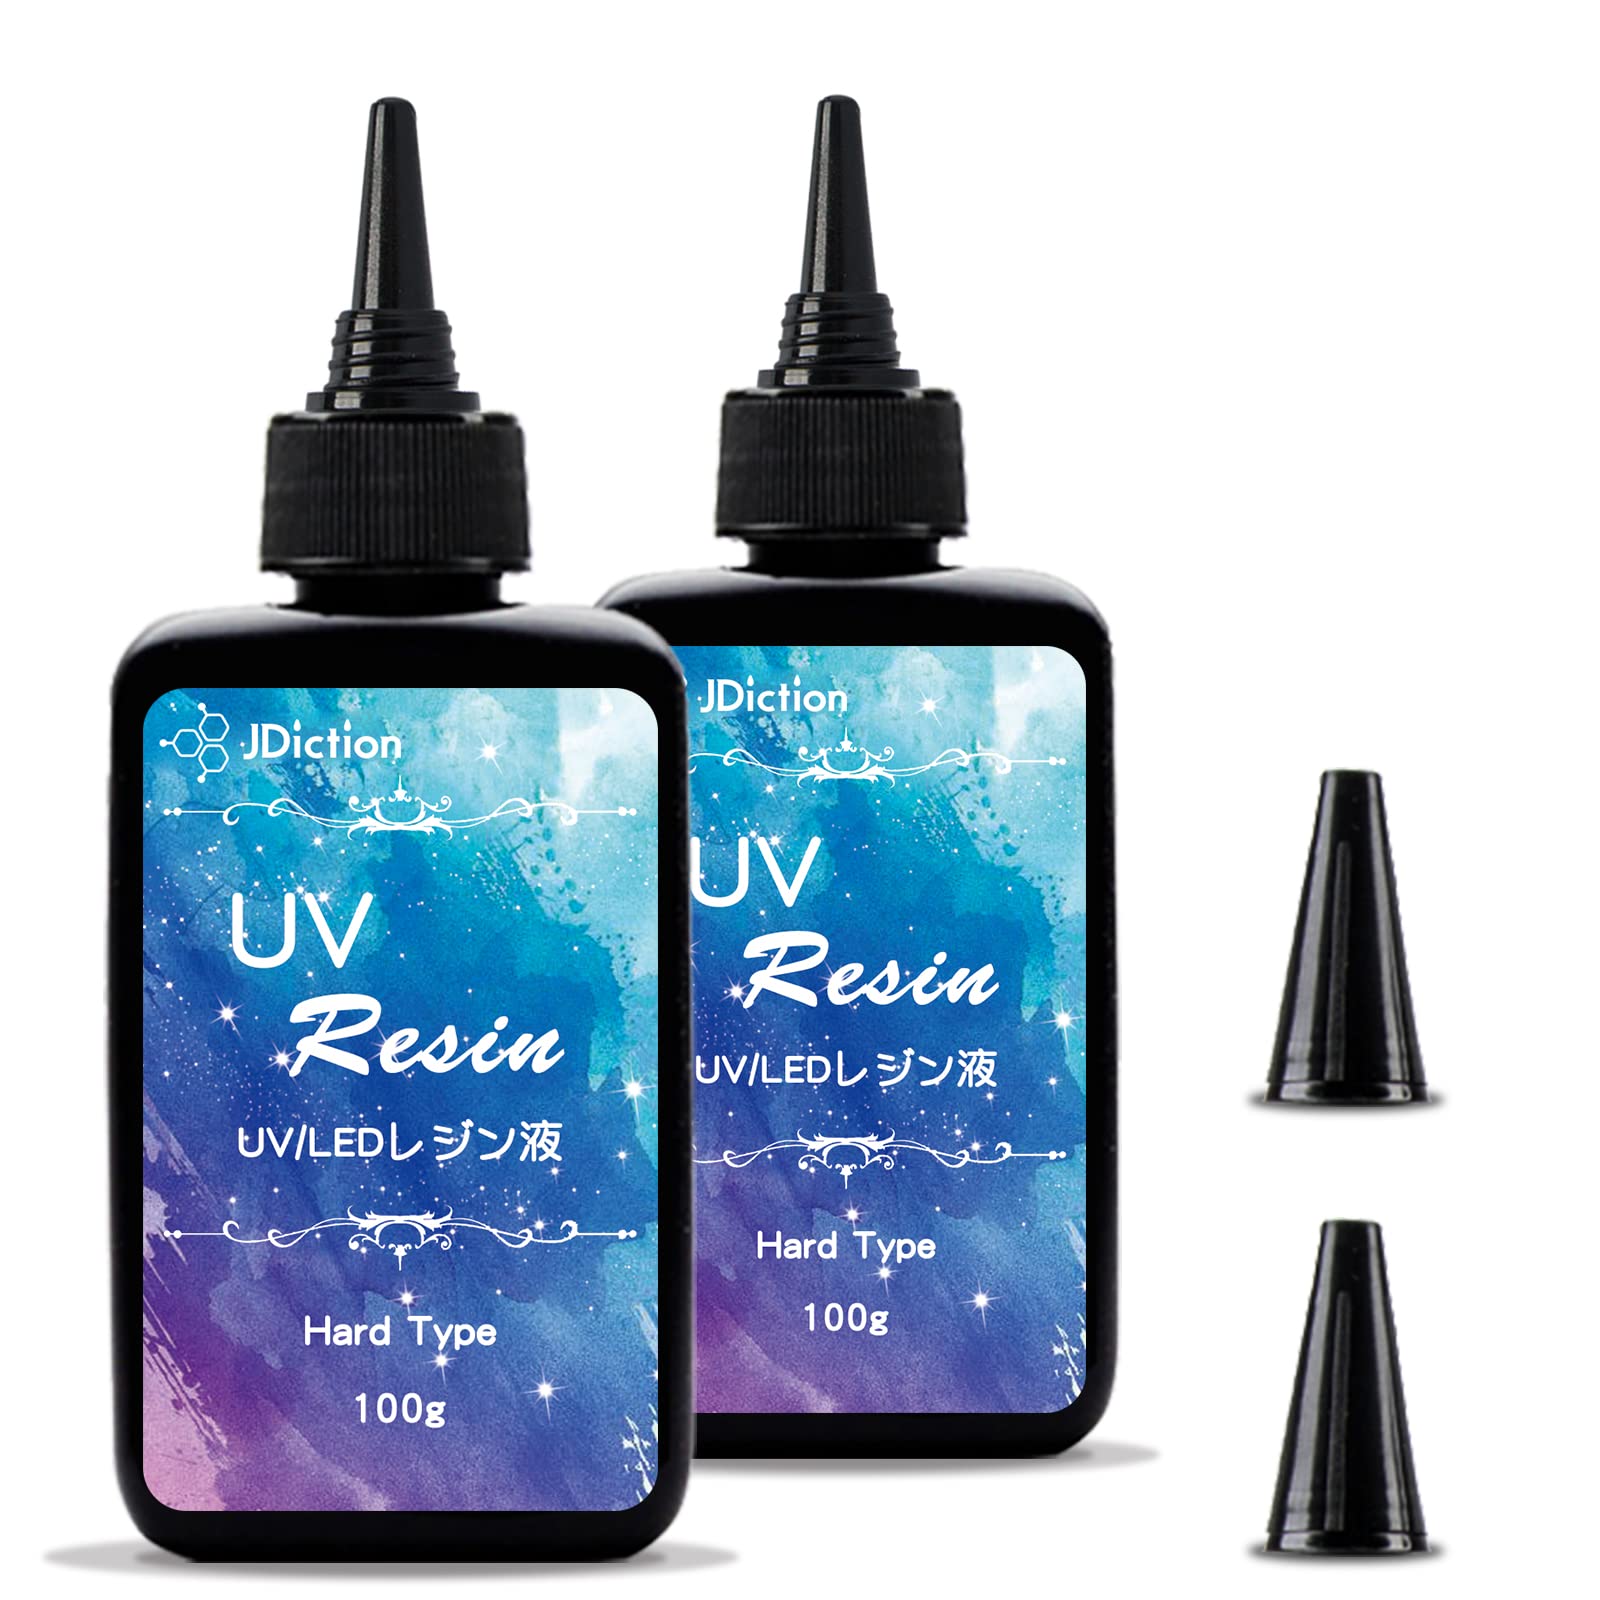 UV Resin - 100g Crystal Clear Hard Type Glue Ultraviolet Curing Epoxy Resin  for DIY Jewelry Making, Craft Decoration, Transparent Solar Cure Sunlight